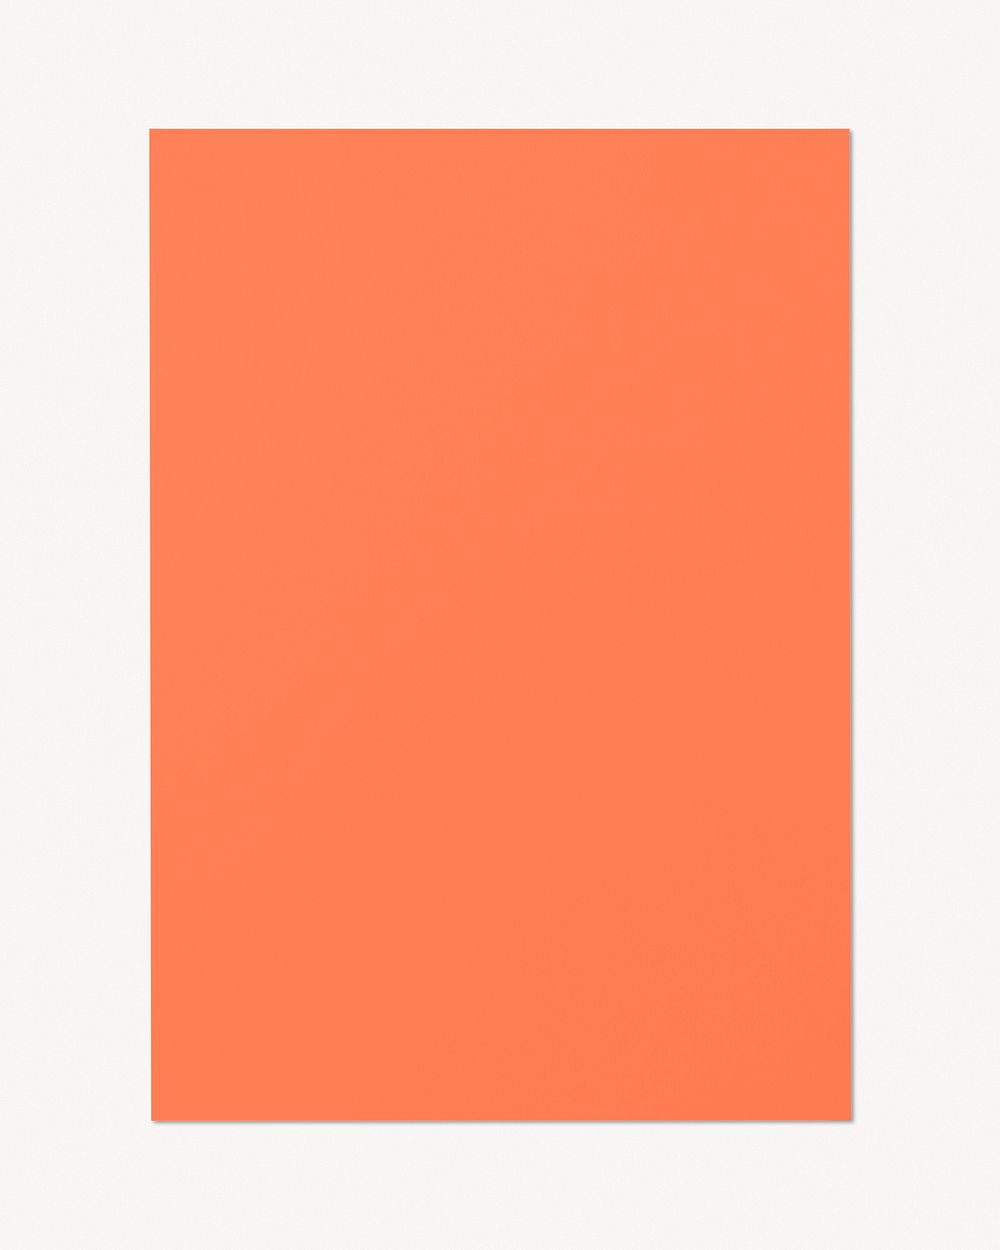 Blank orange poster, paper with design space